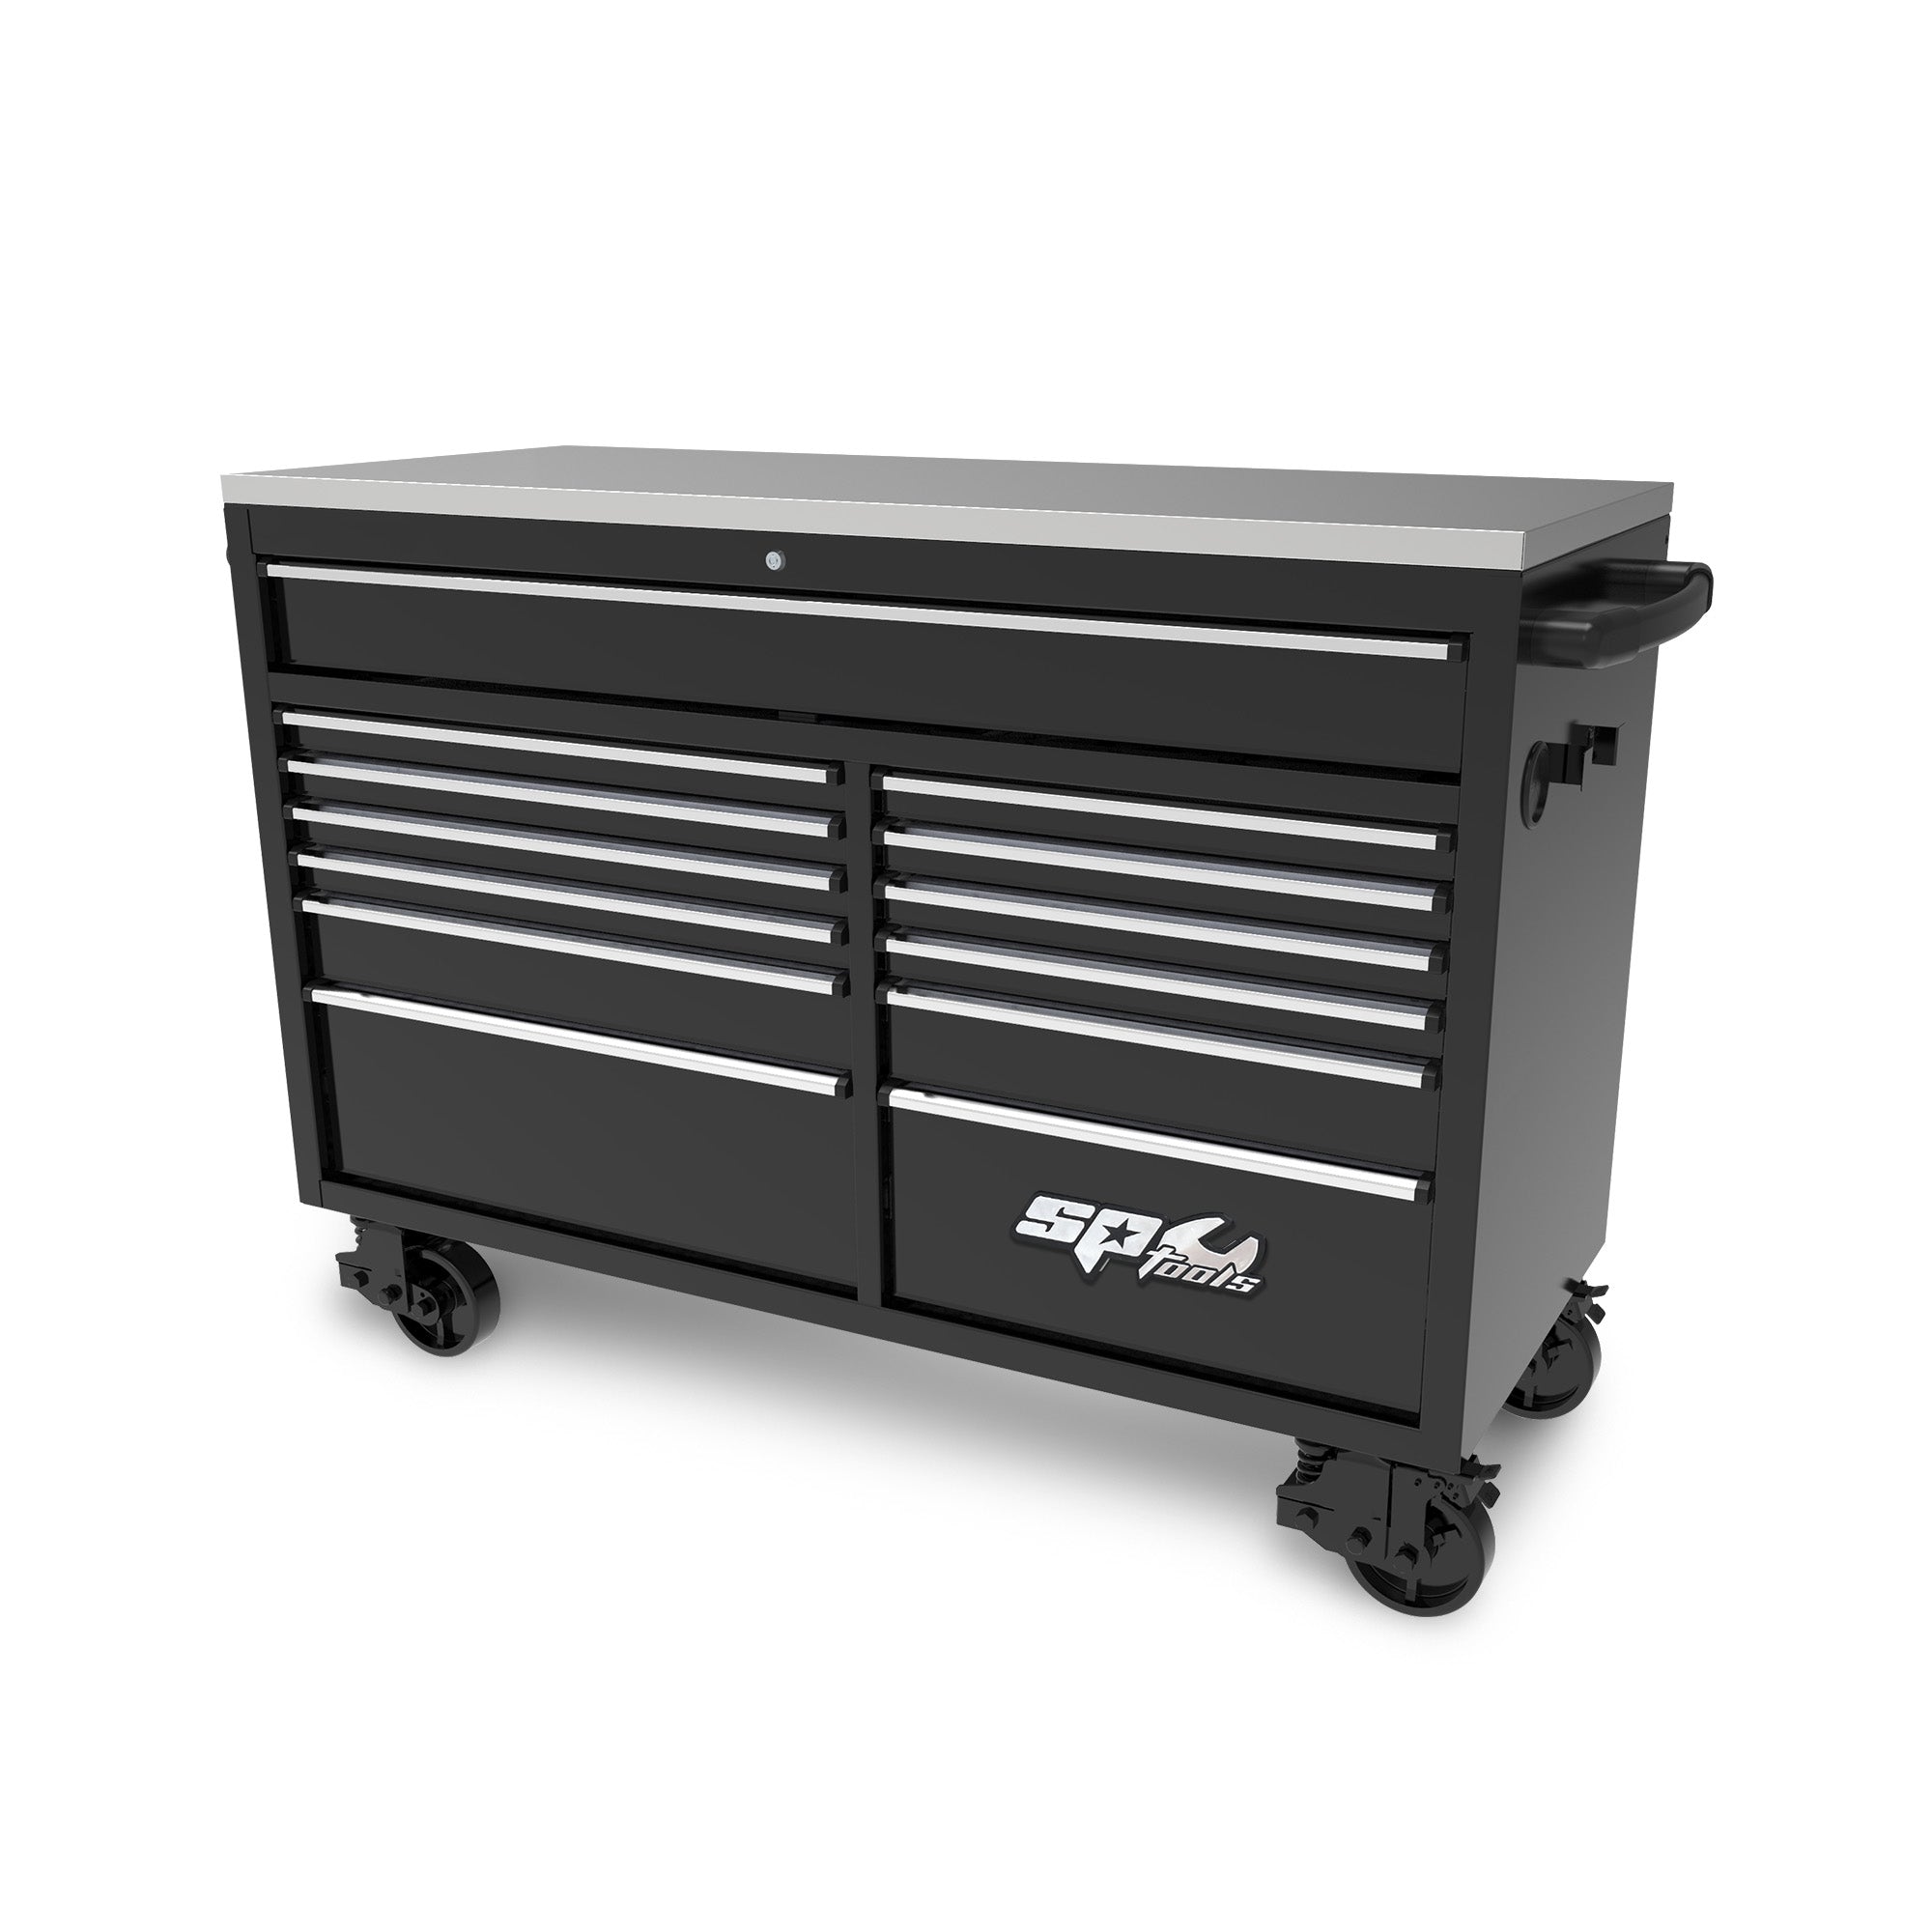 59" 13 Drawer Double Bank Toolbox